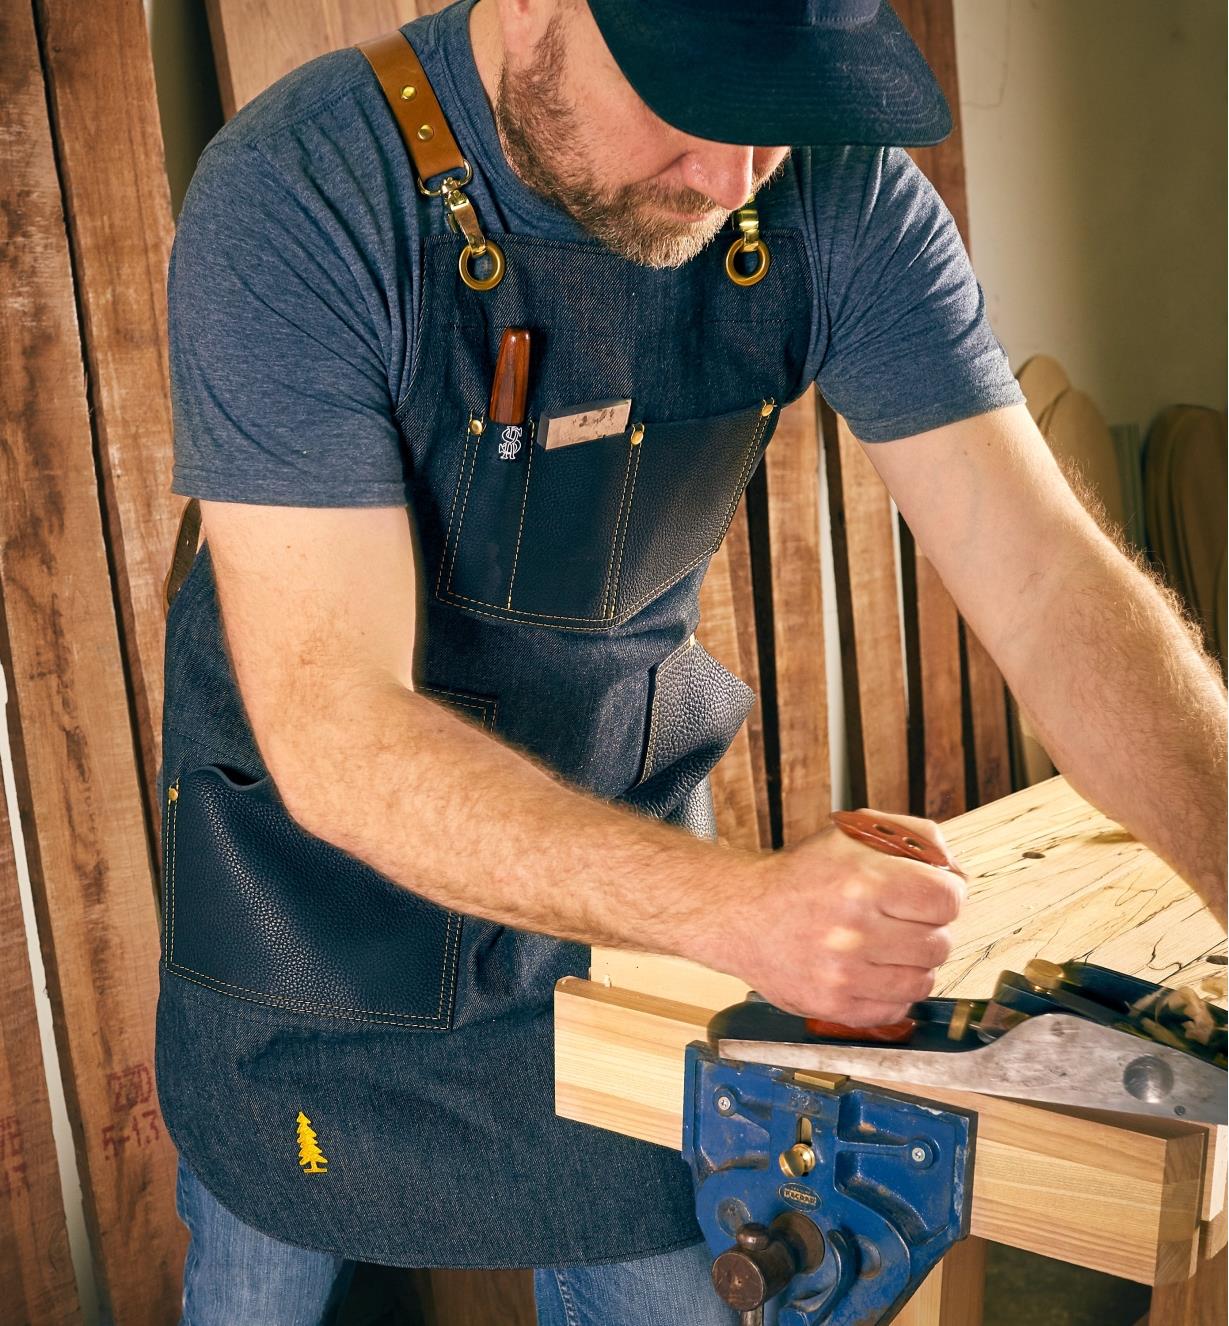 A man planing a board while wearing the All-Purpose Apron